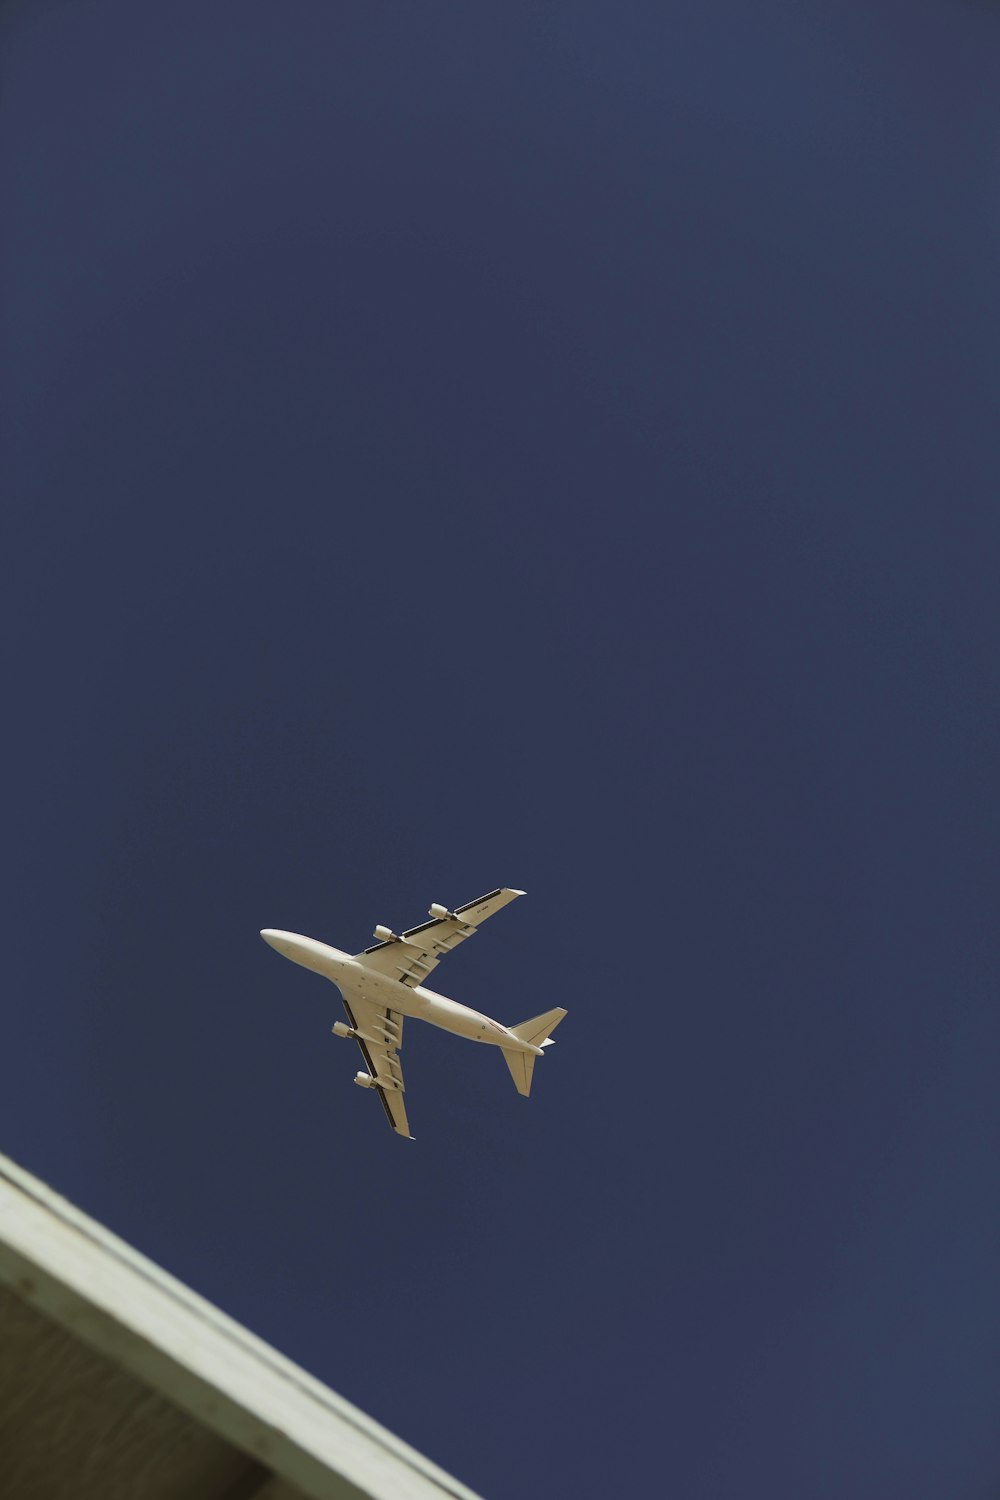 white airplane in mid air during daytime